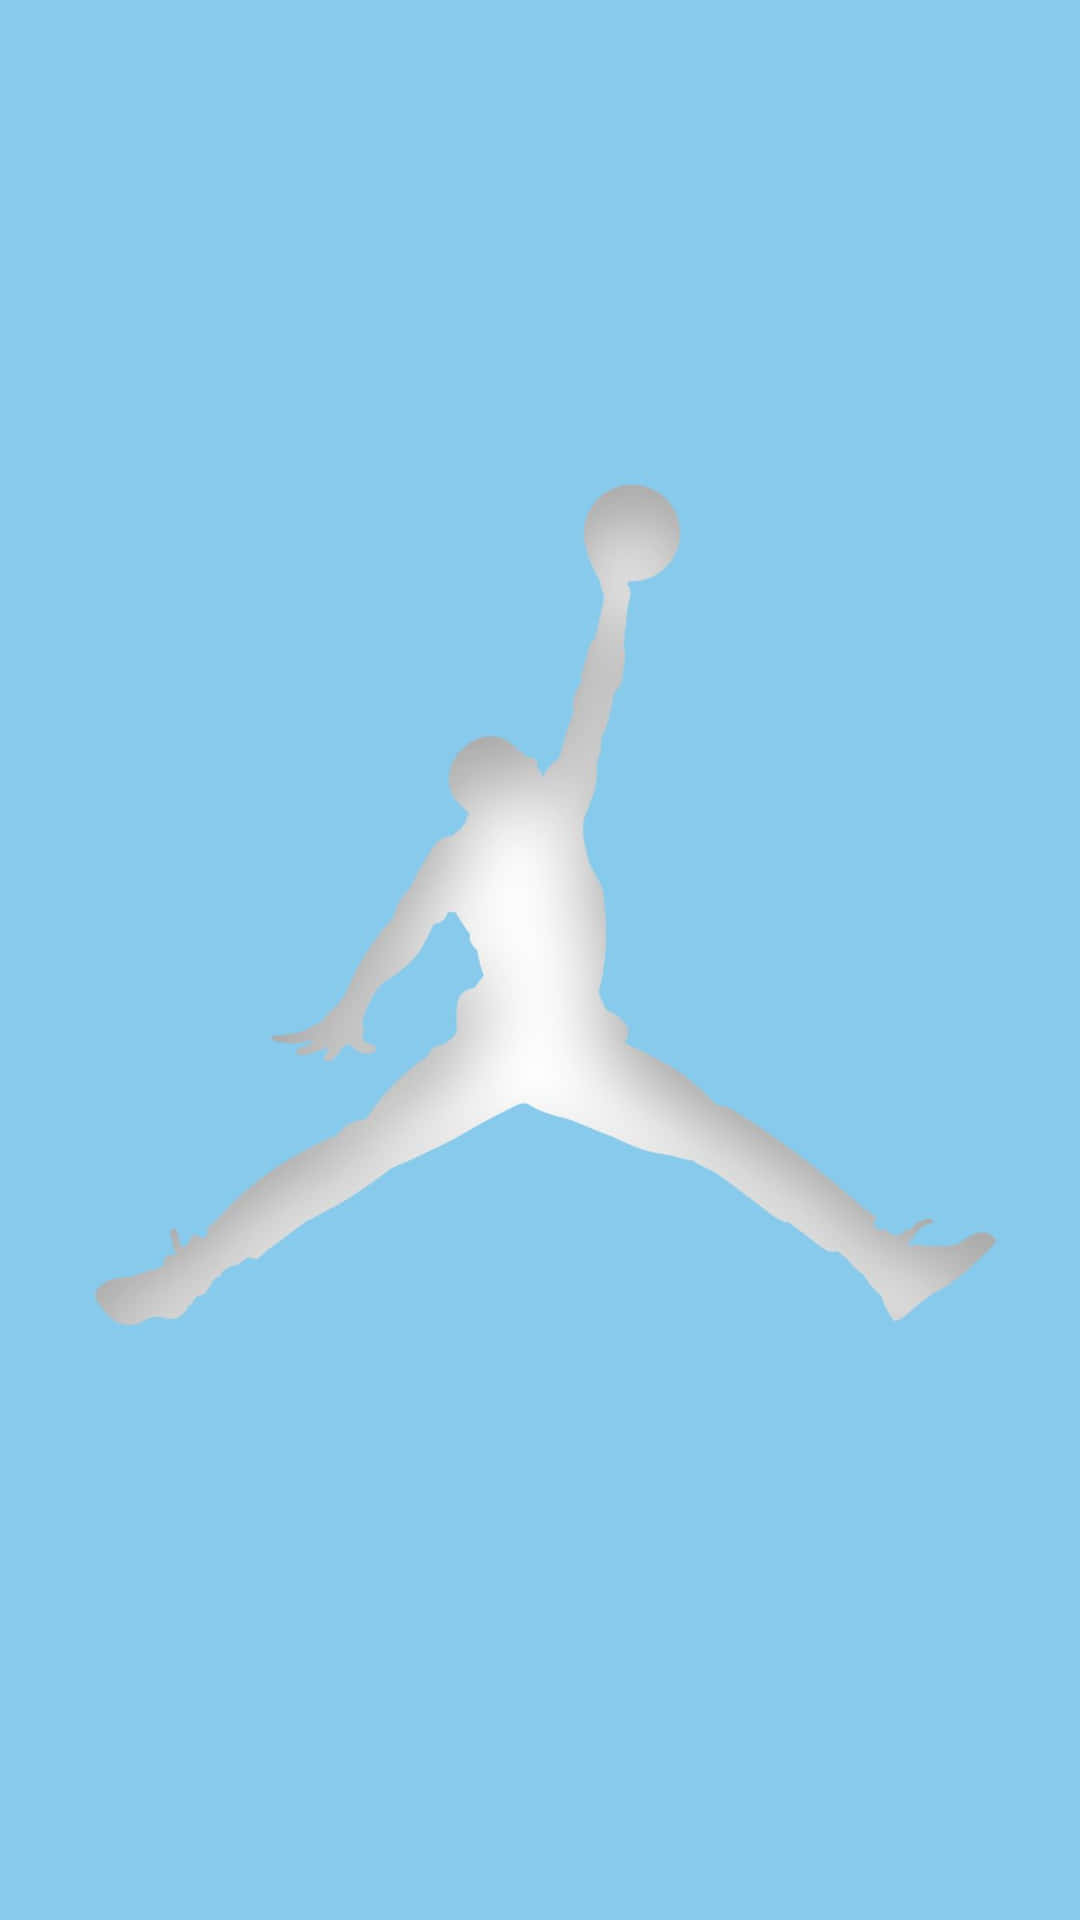 Blue Jordan's Sneakers in action on a matching background Wallpaper